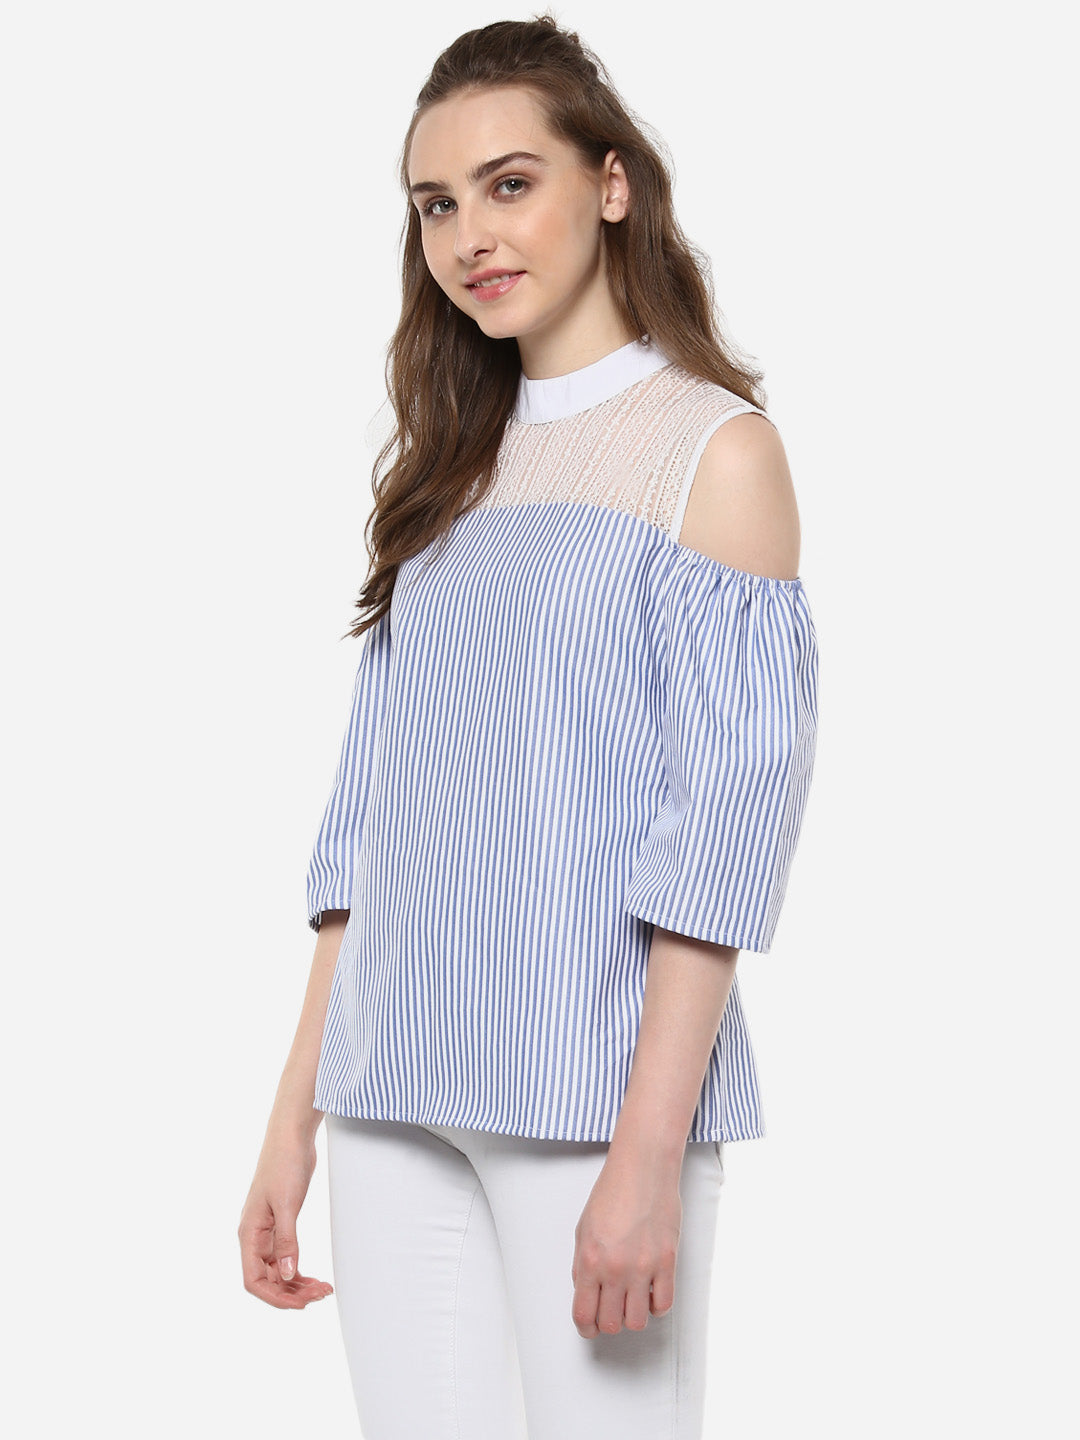 Women's Blue and White Stripe top with Lace detailing